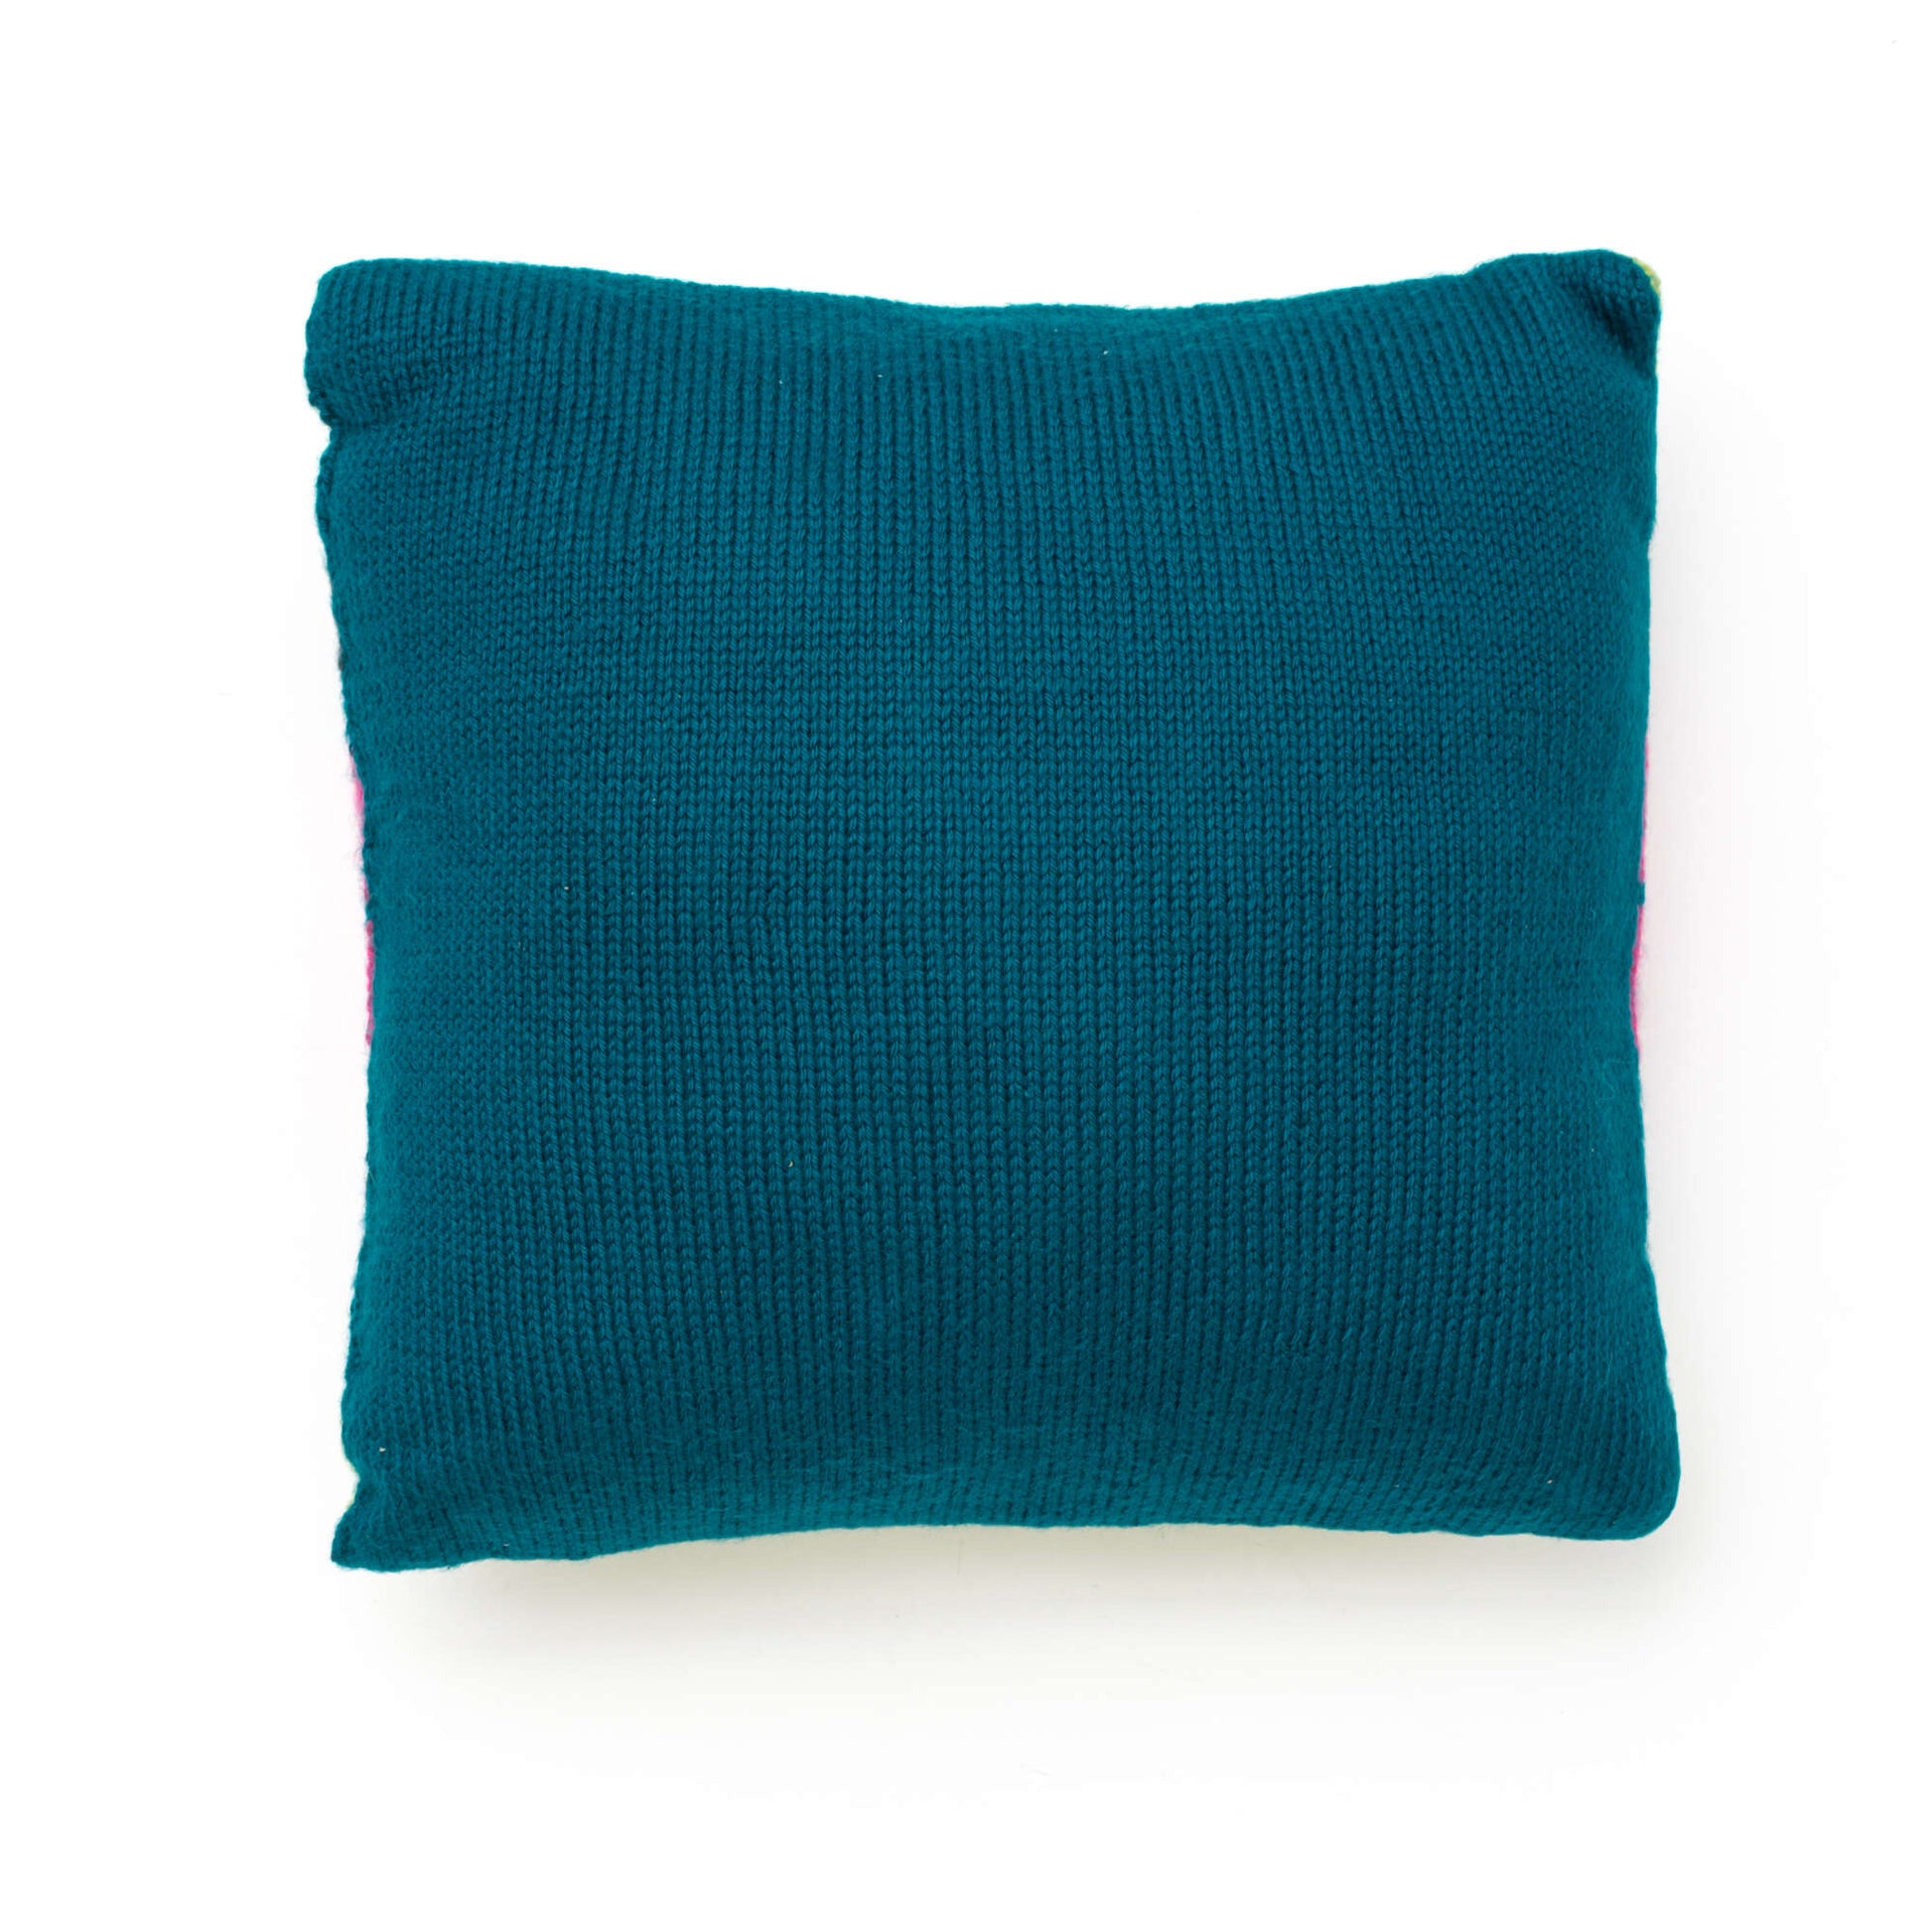 Free Caron Knit In Vivid Color Pillow Pattern